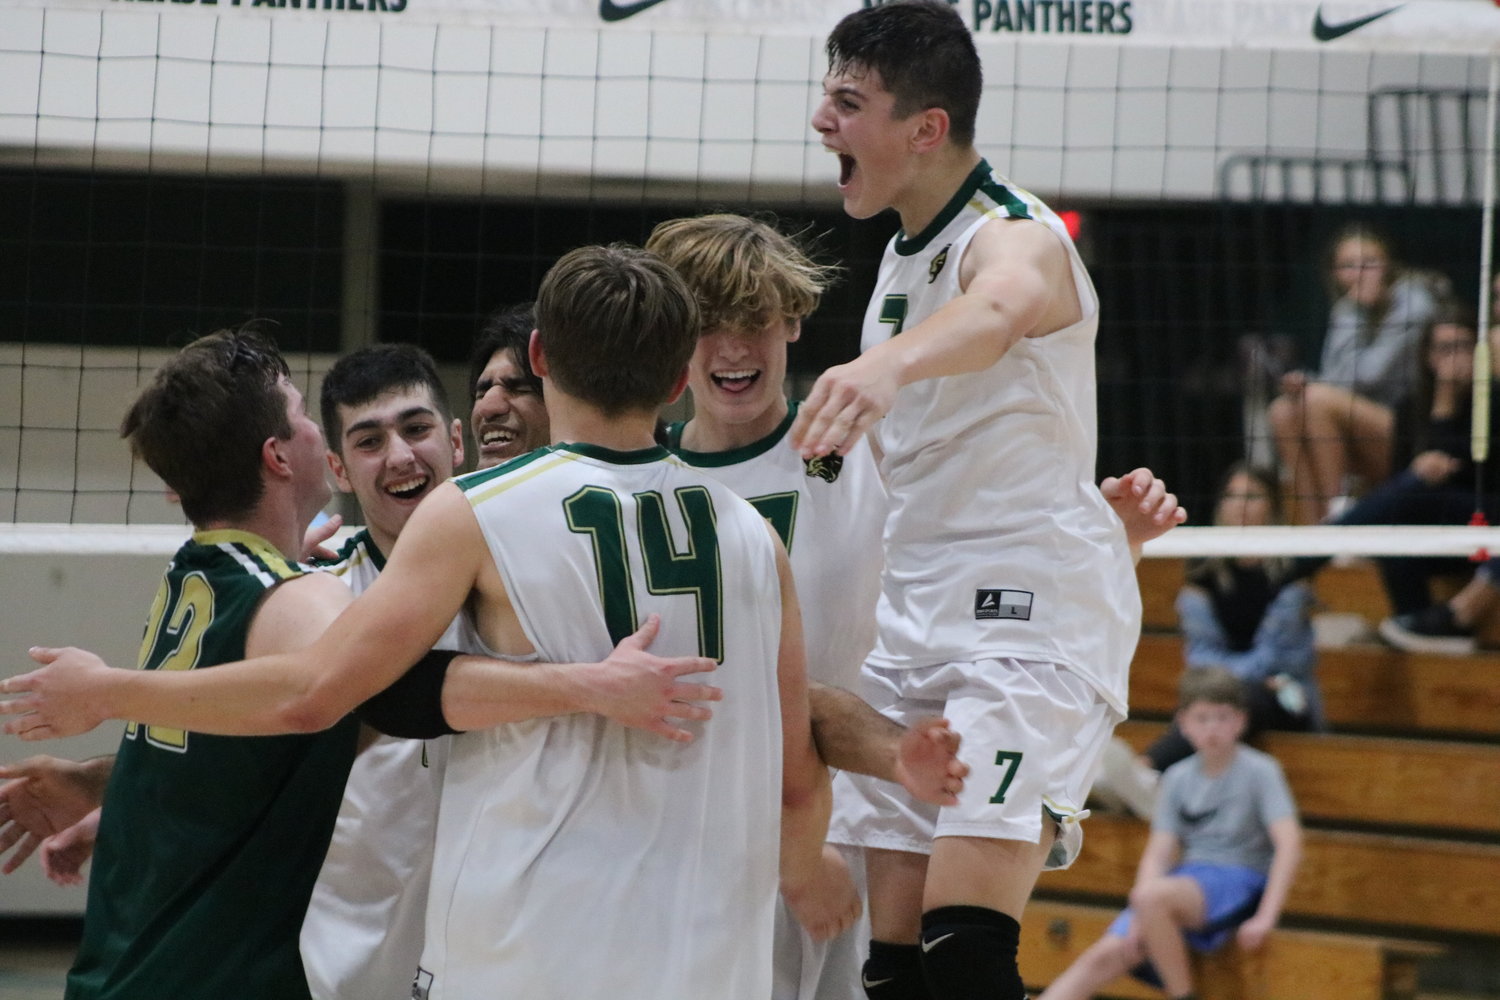 Nease High won its first home game in the history of the boys volleyball program and did so over rival Ponte Vedra High March 10.